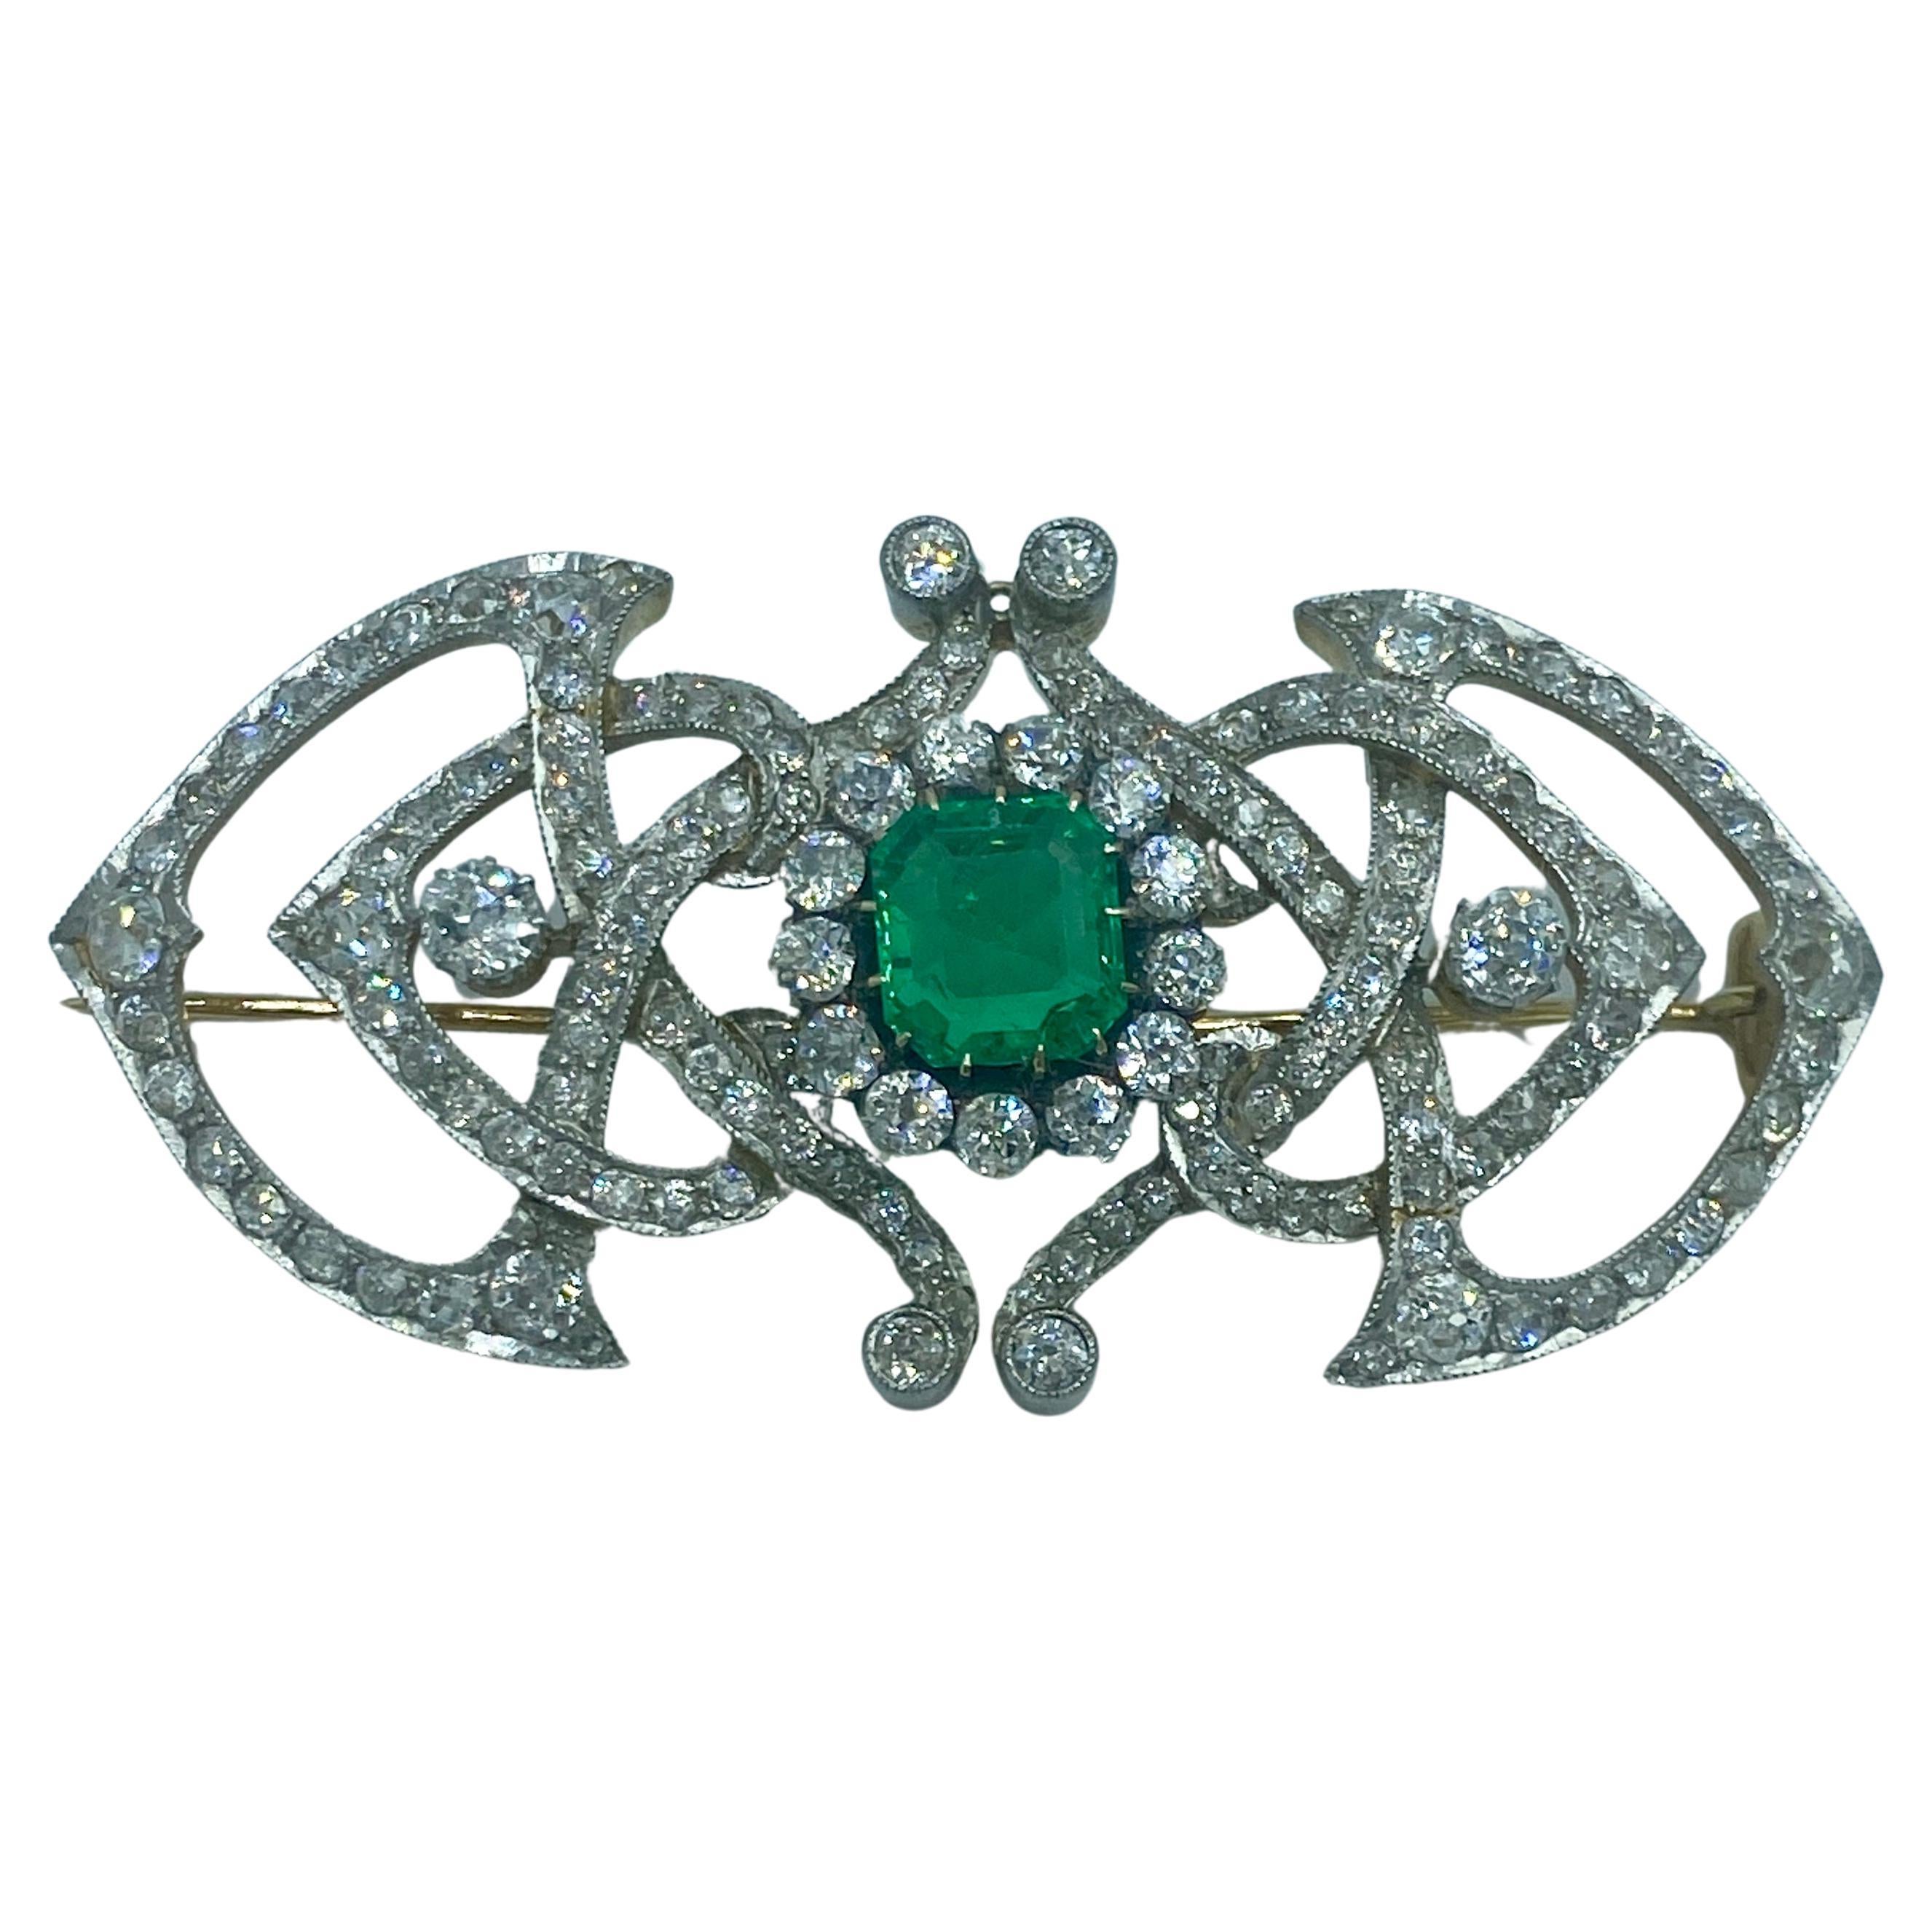 1870s French emerald and diamond brooch